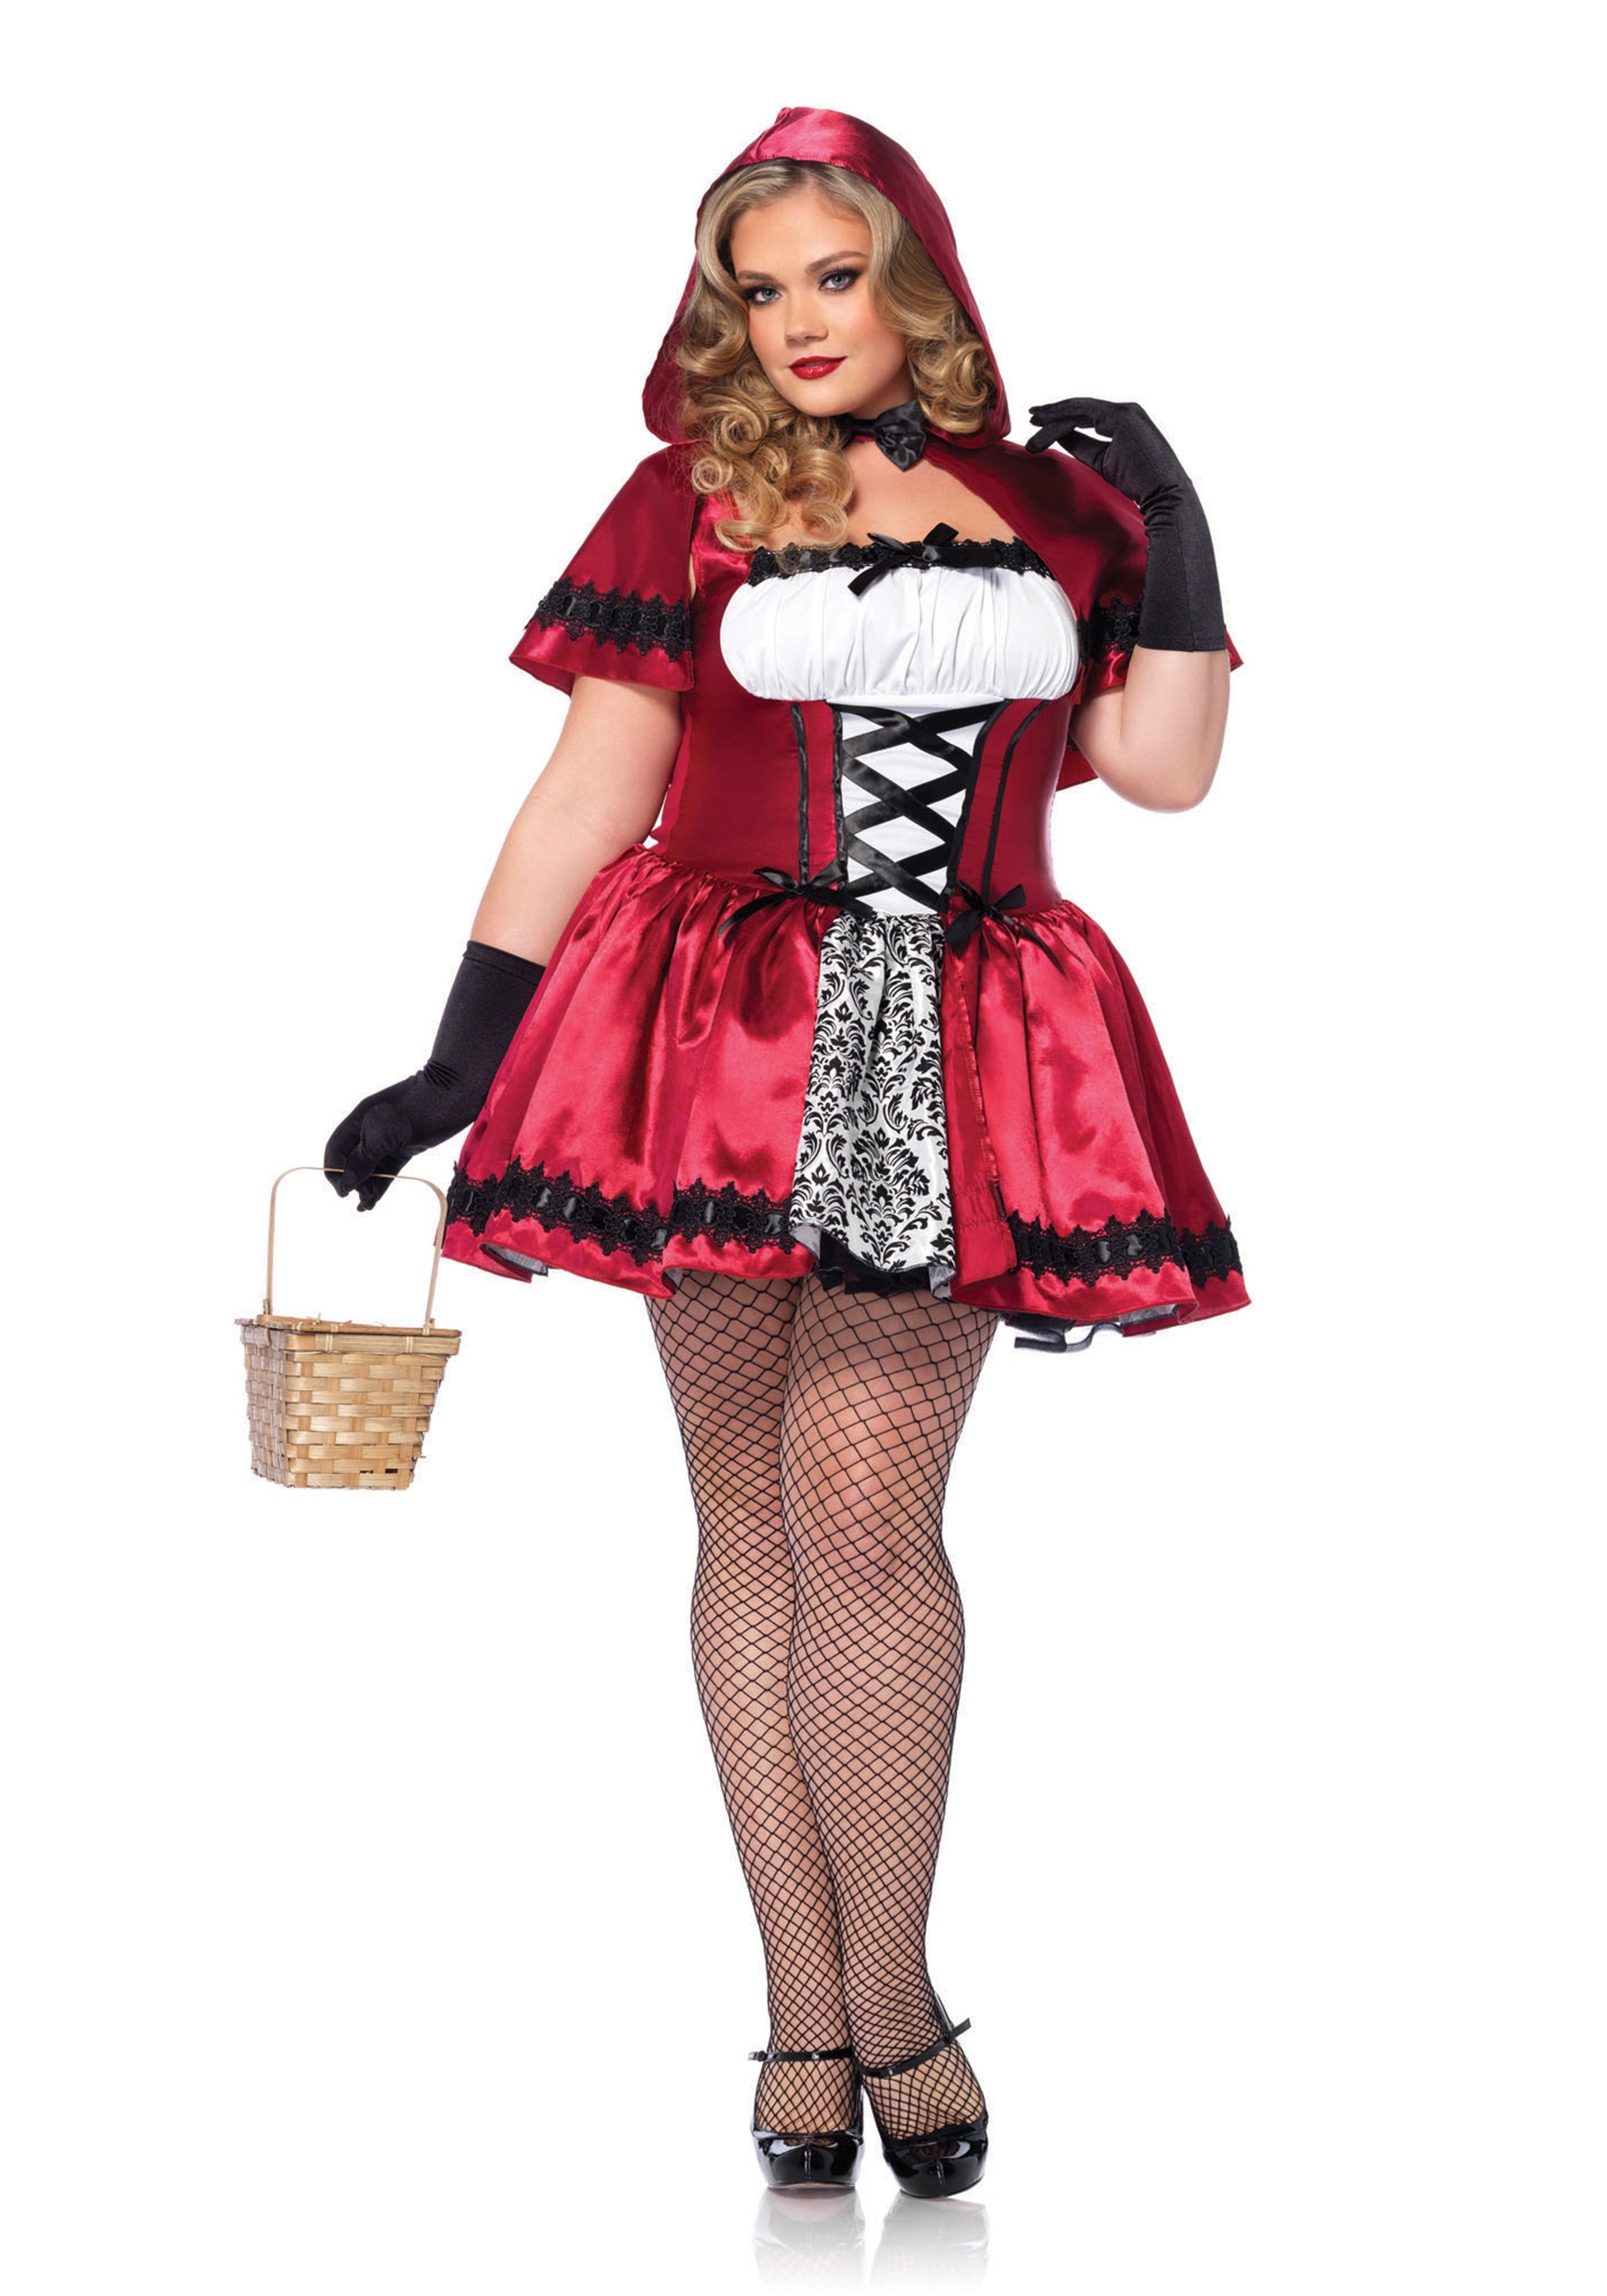 Plus Size Women's Gothic Red Riding Hood Costume